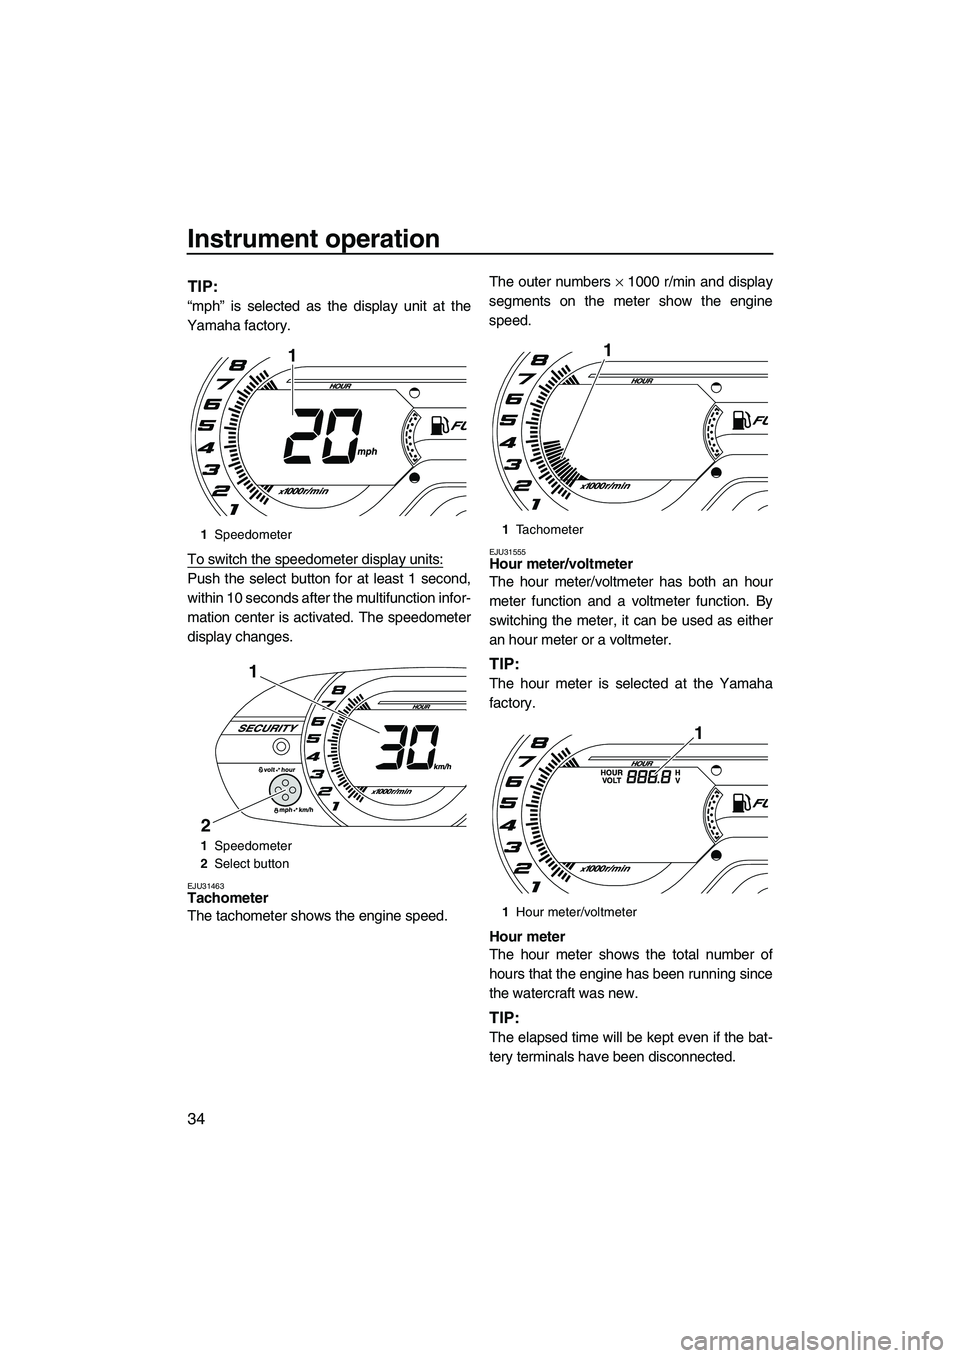 YAMAHA VX SPORT 2013  Owners Manual Instrument operation
34
TIP:
“mph” is selected as the display unit at the
Yamaha factory.
To switch the speedometer display units:
Push the select button for at least 1 second,
within 10 seconds a